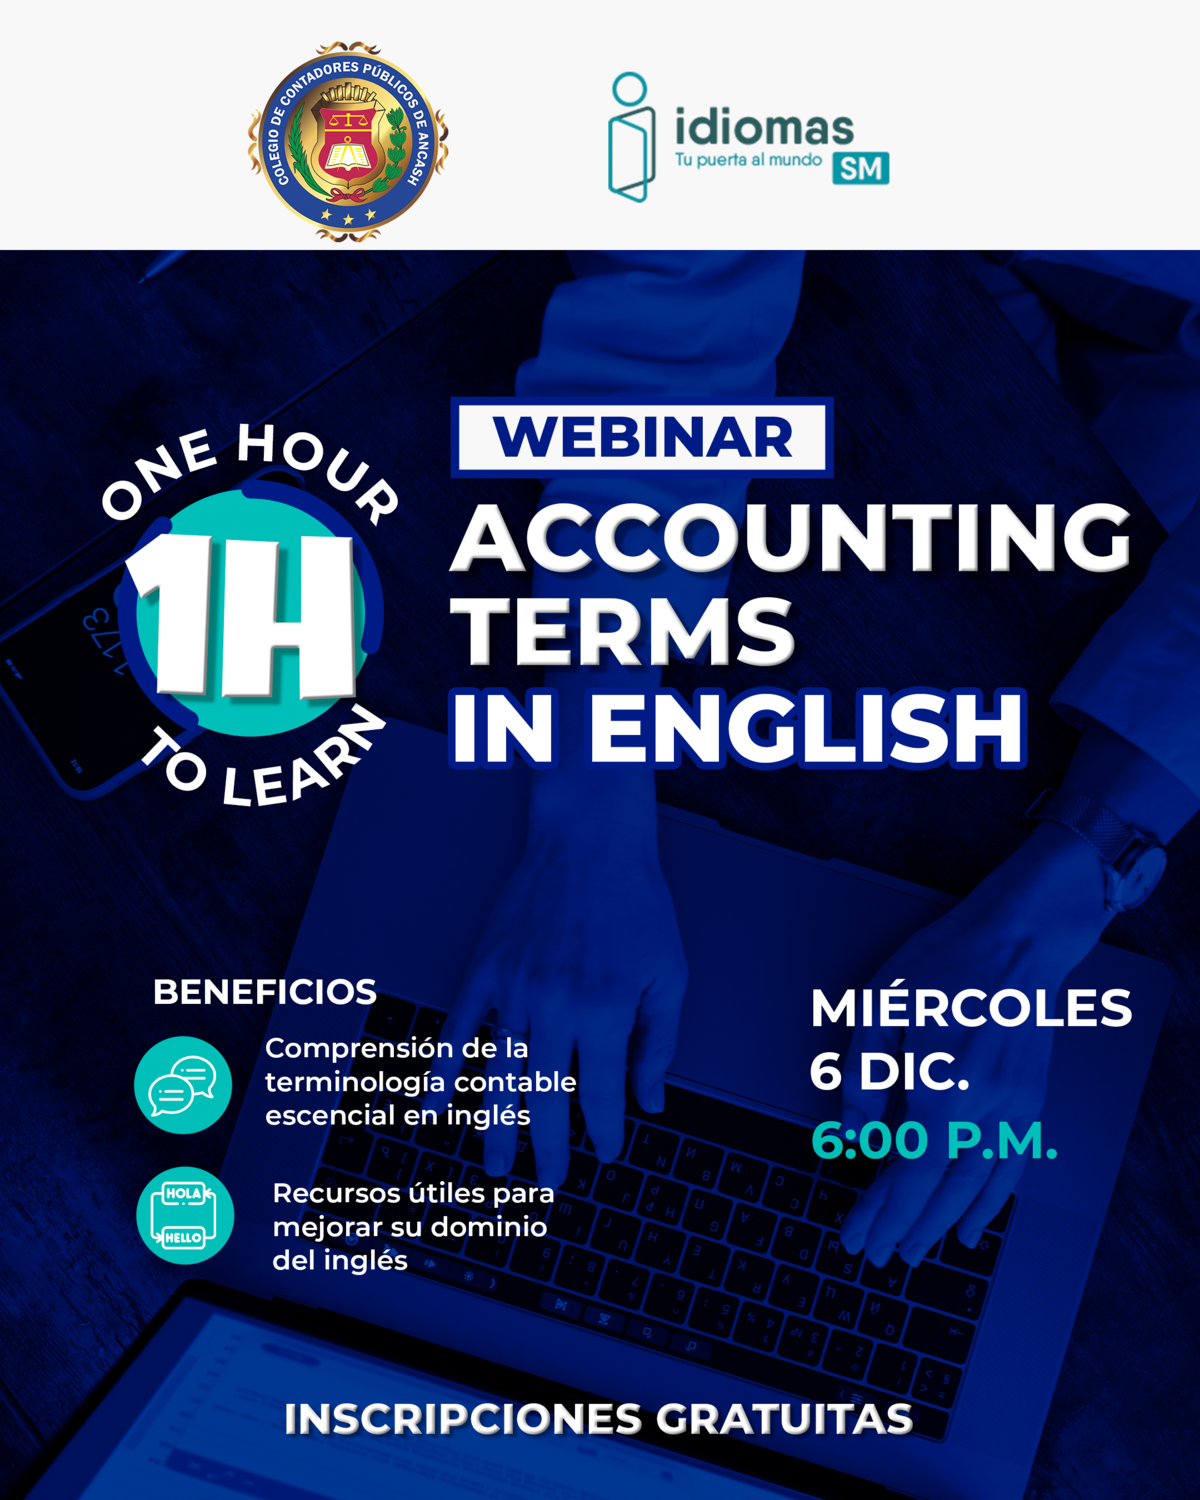 Webinar: One hour learn accounting terms in english - Idiomas SM